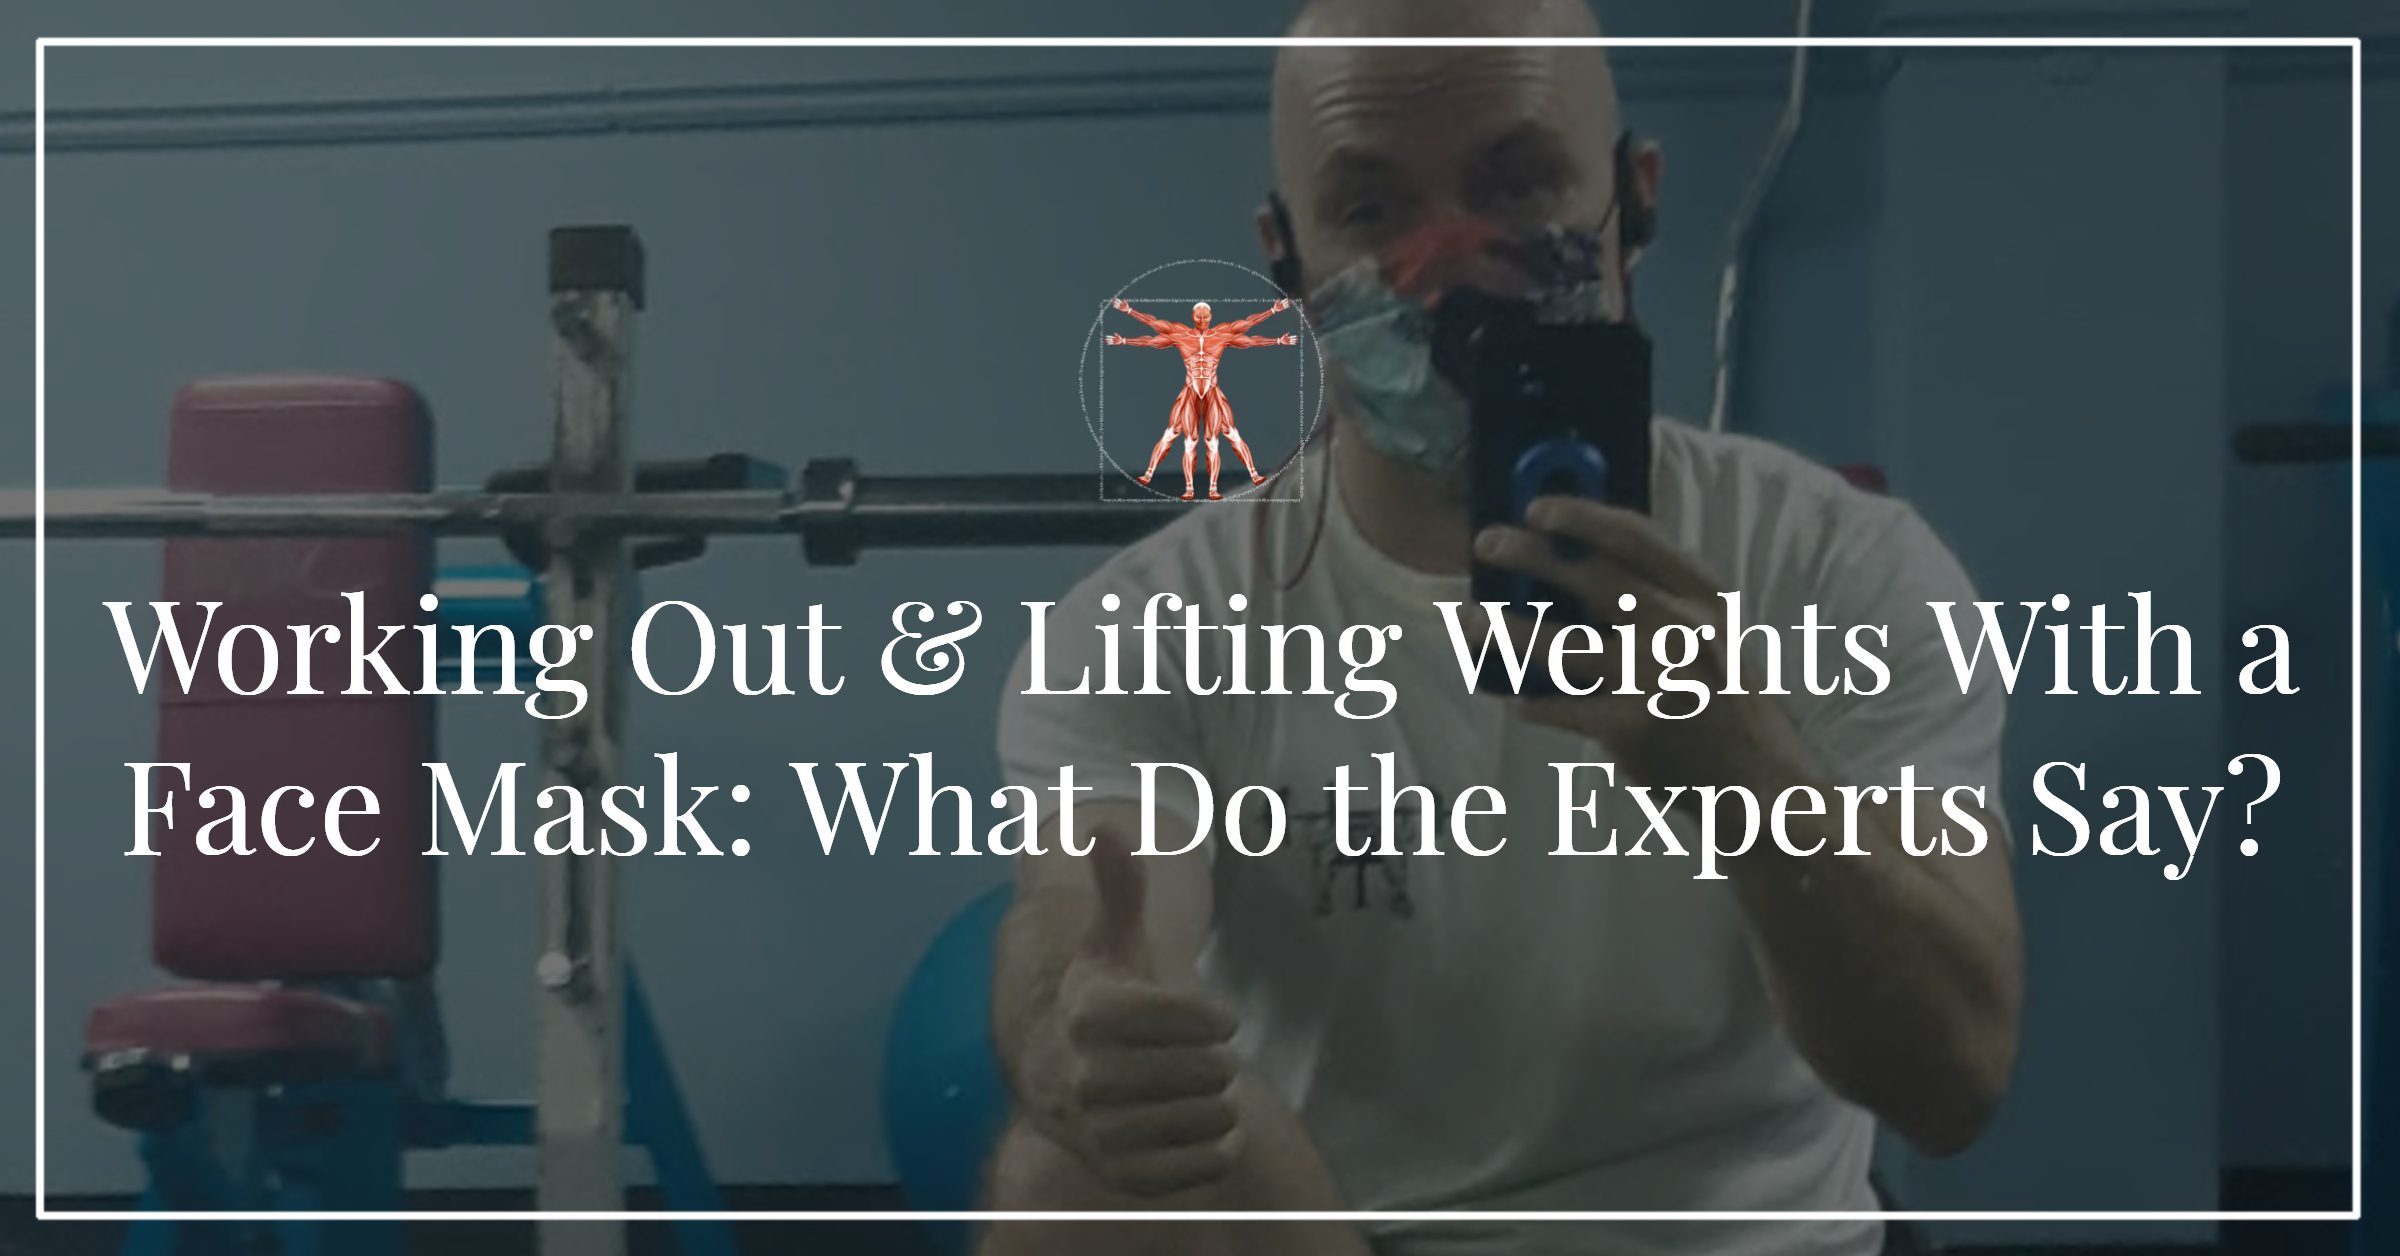 Working Out & Lifting Weights With a Face Mask: What Do the Experts Say?